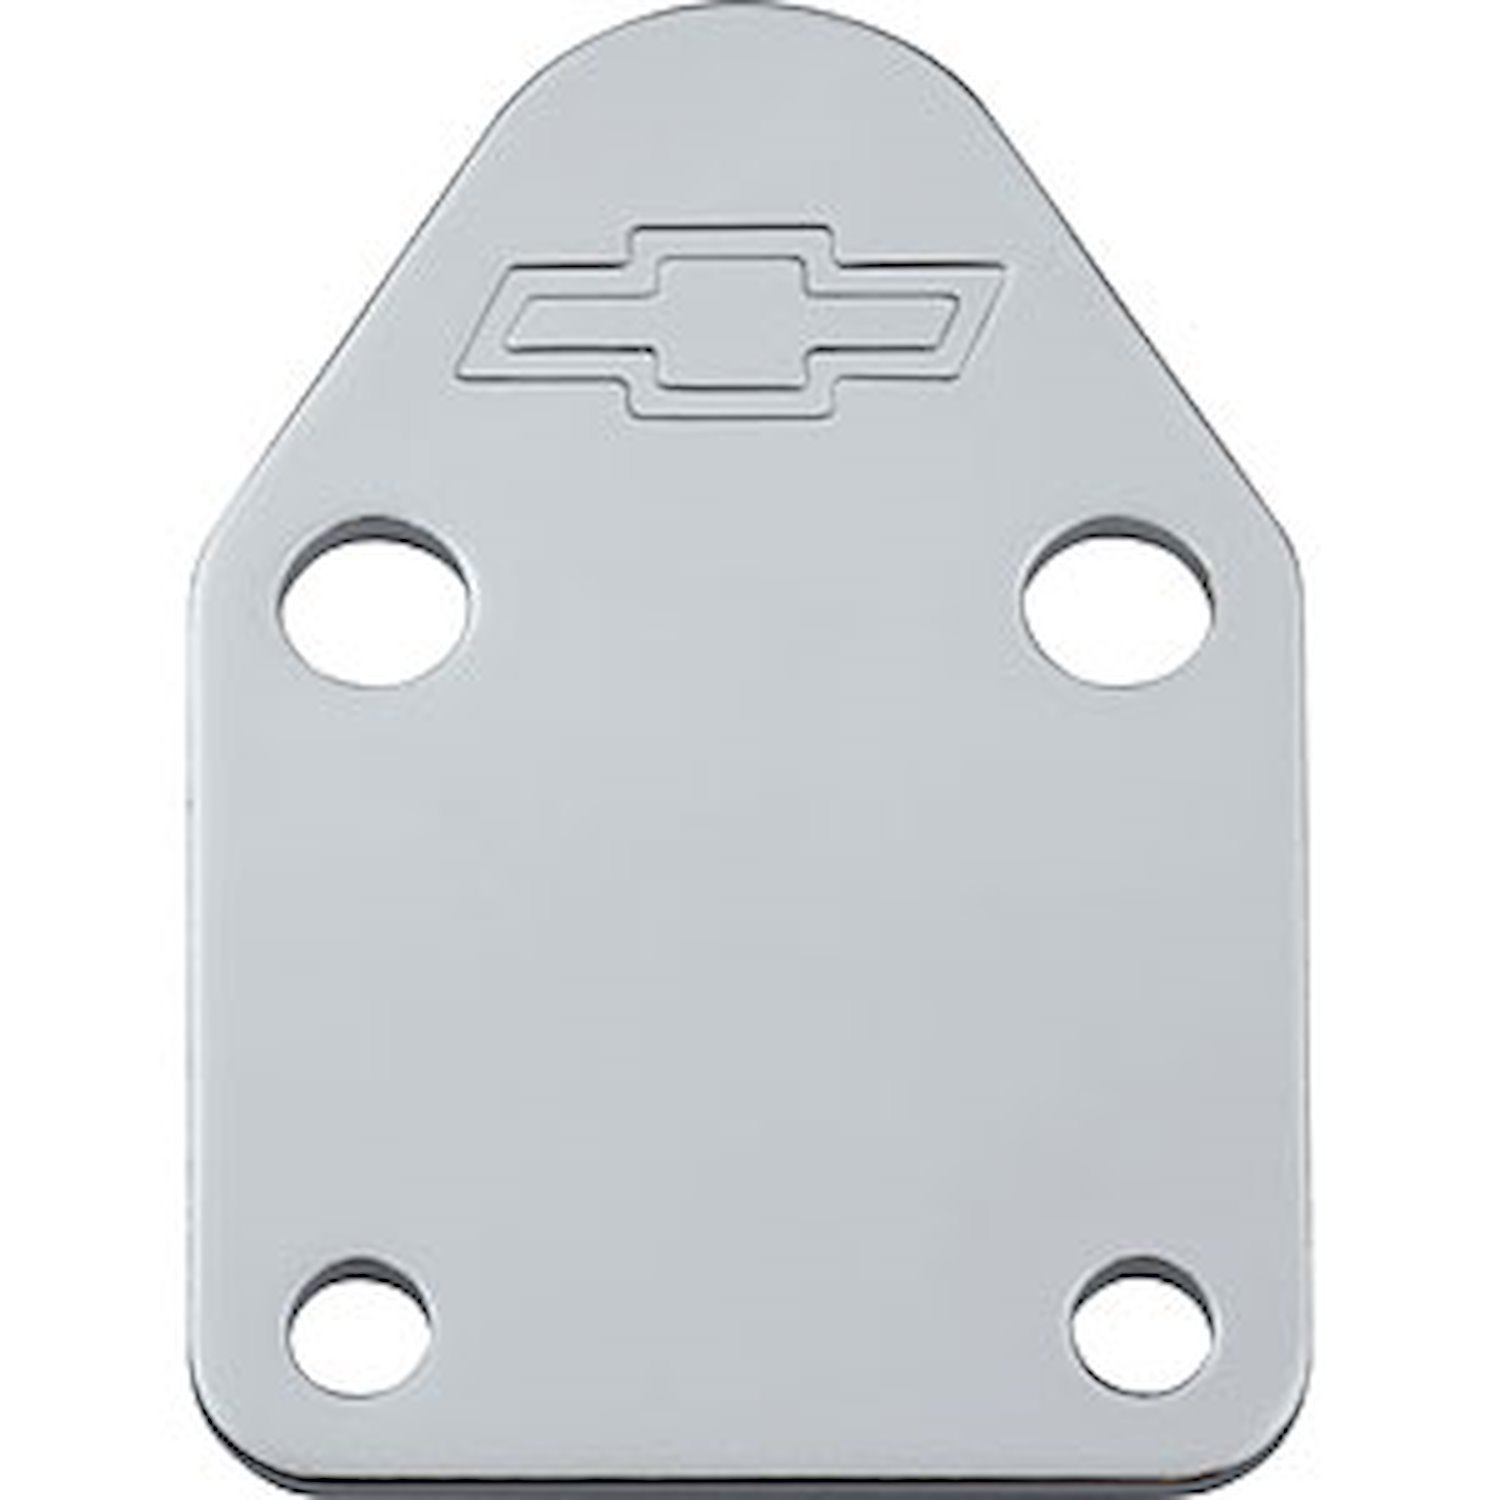 Bowtie Fuel Pump Block-Off Plate for Small Block Chevy in Chrome